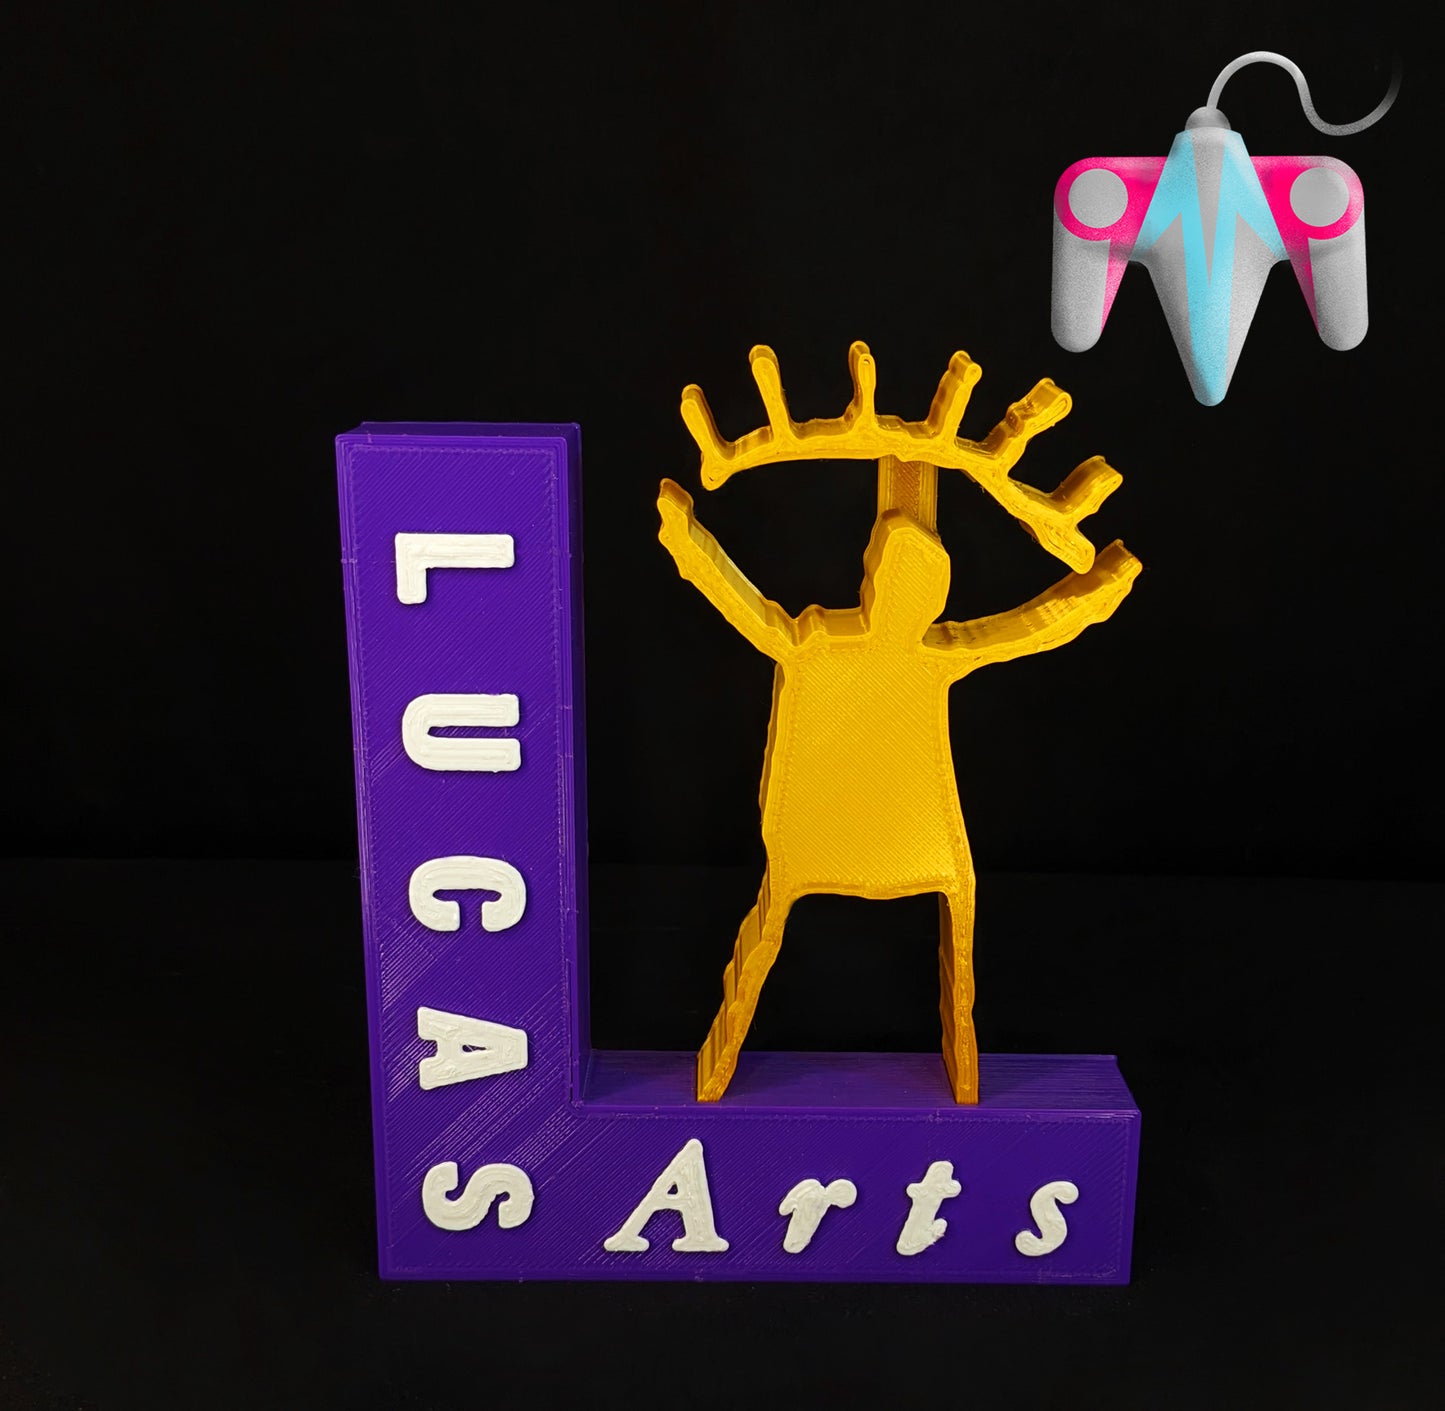 3D Printed Lucasarts Plaque Wall/Shelf Decor (FREE SHIPPING)